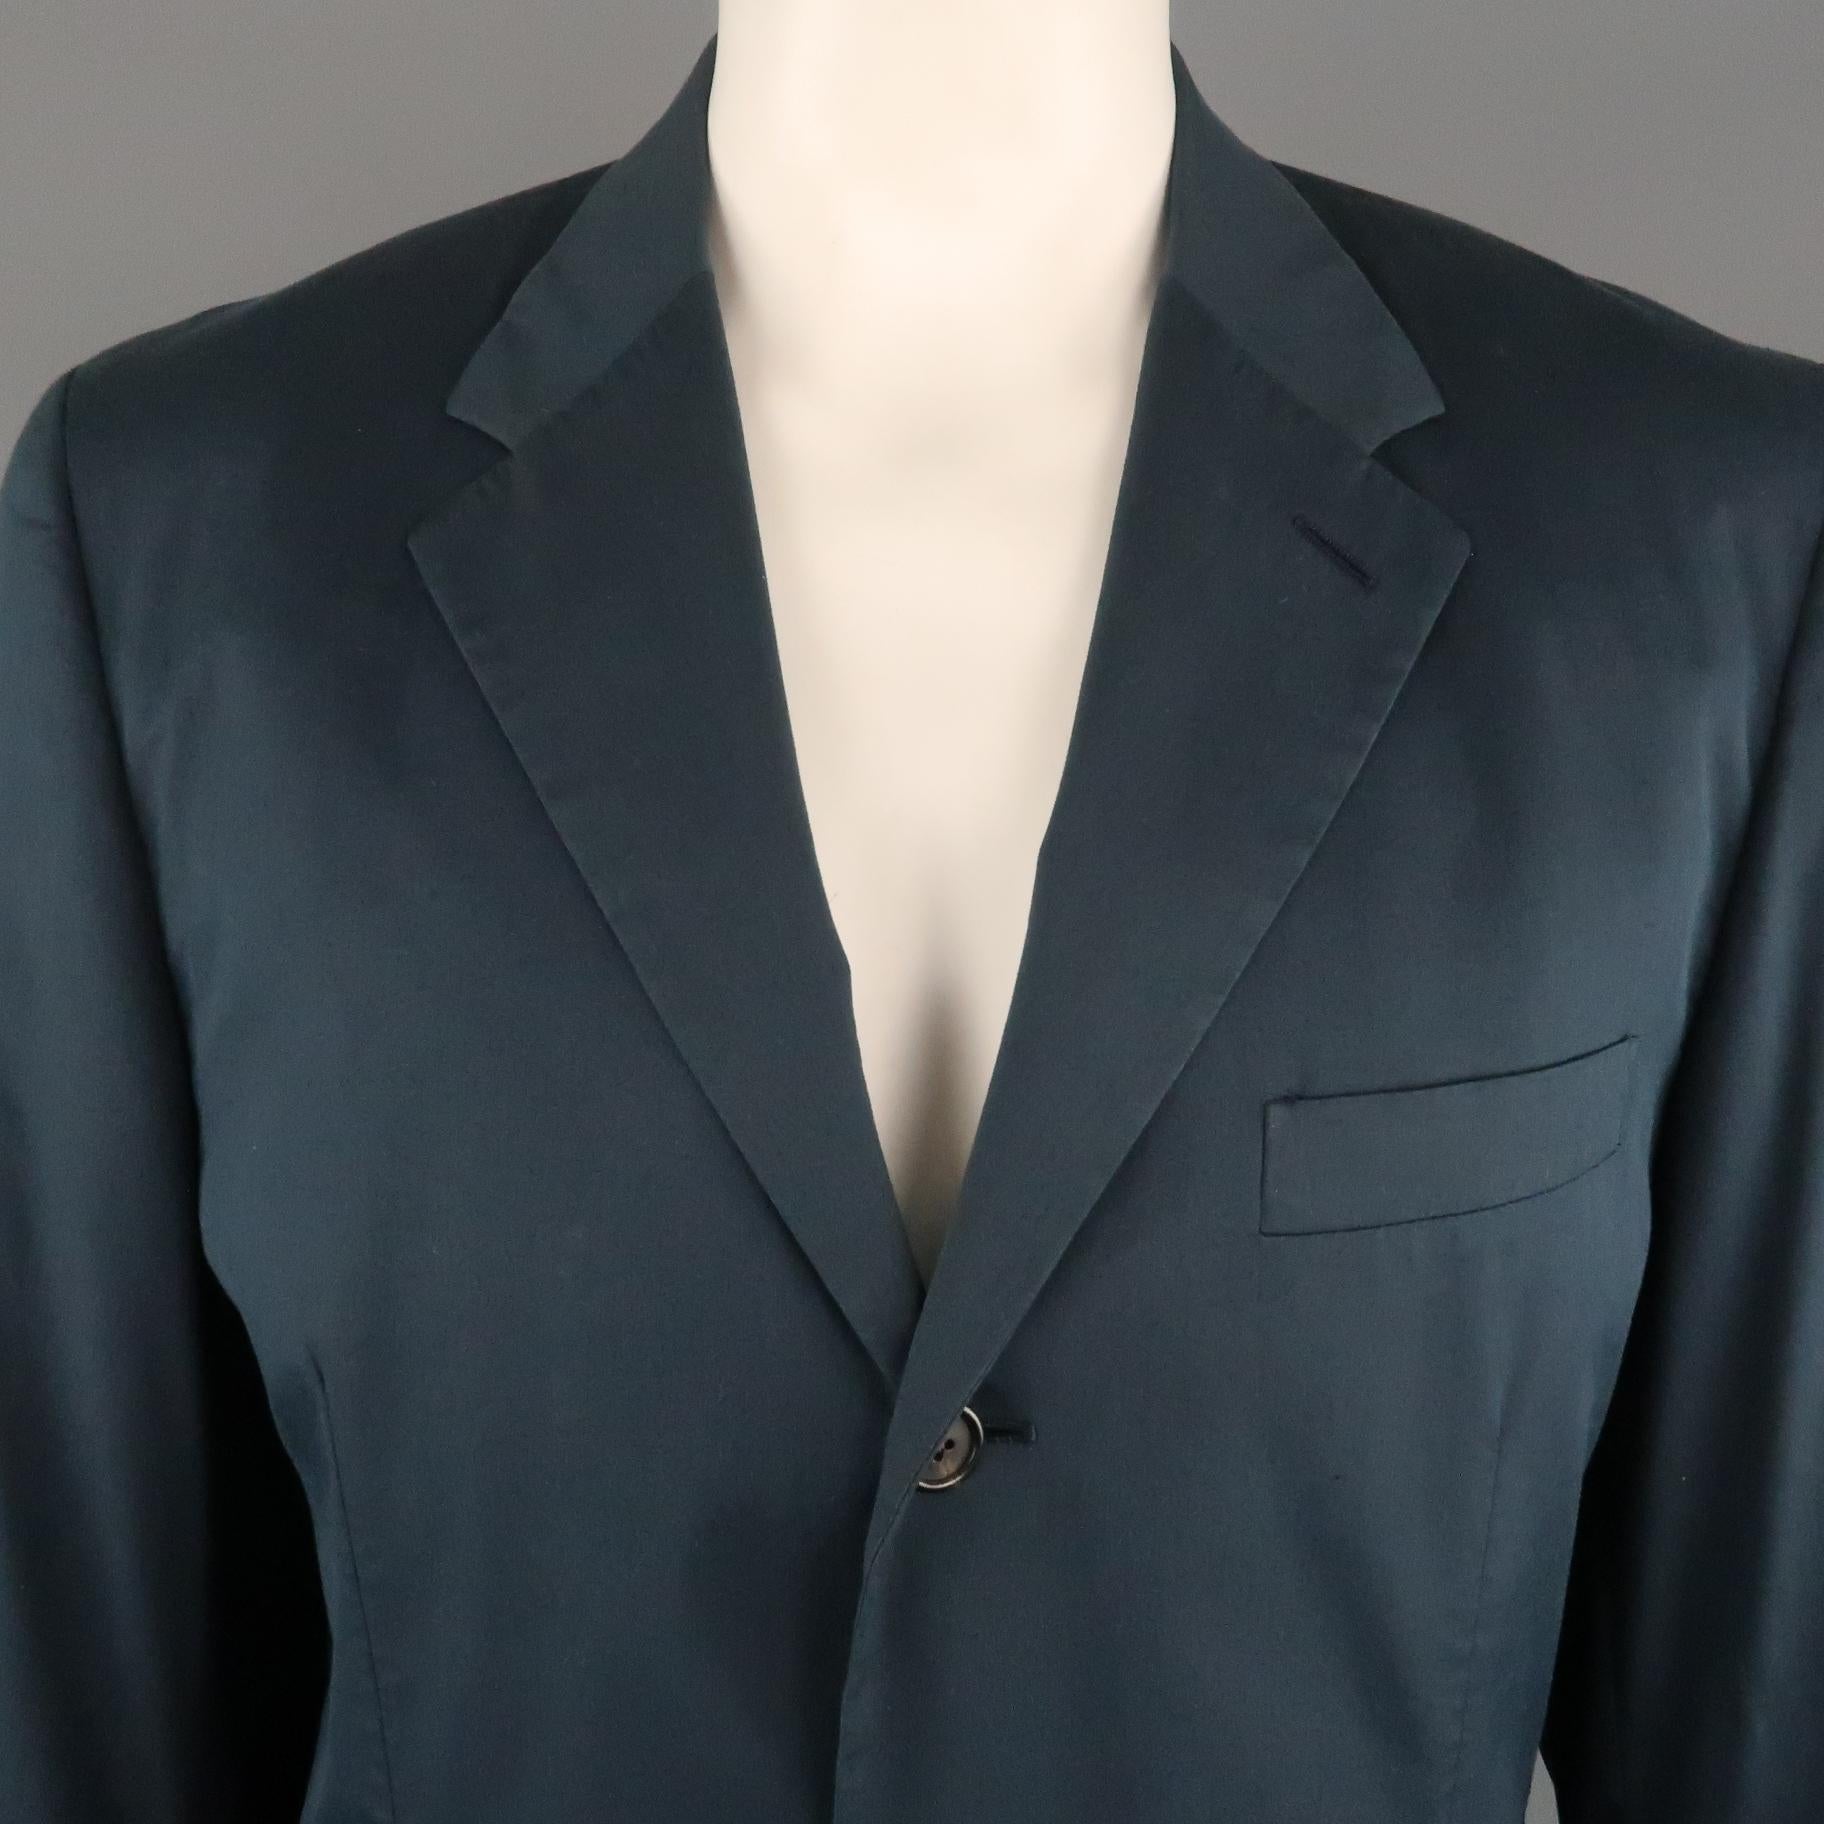 PRADA sport coat comes in a navy cotton blend featuring a notch lapel, flap pockets, and a two button closure. Made in Italy.
 
Very Good Pre-Owned Condition.
Marked: 54
 
Measurements:
 
Shoulder: 20 in.
Chest: 44 in.
Sleeve: 27 in.
Length: 27.5 in.